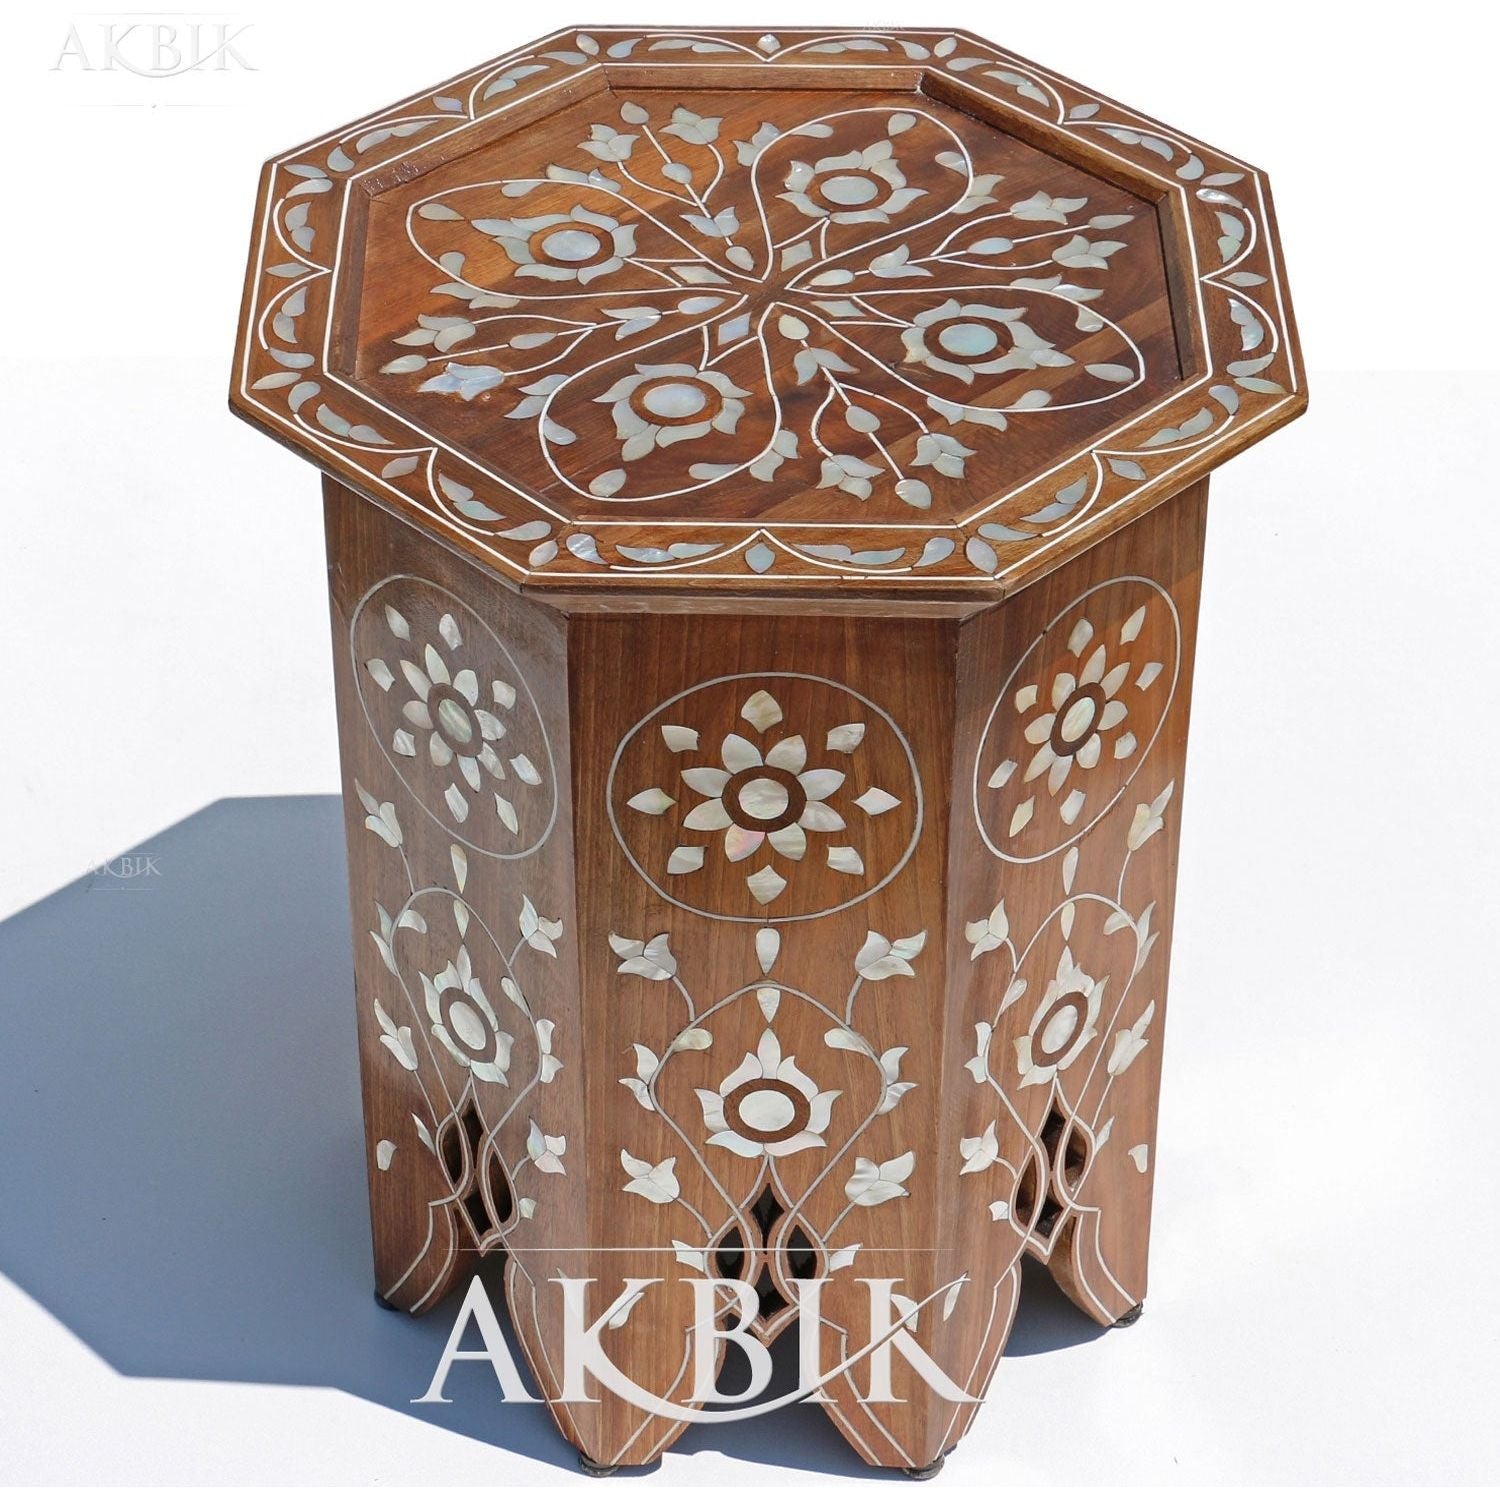 MOTHER OF PEARL INLAID SIDE TABLE | AKBIK Furniture & Design